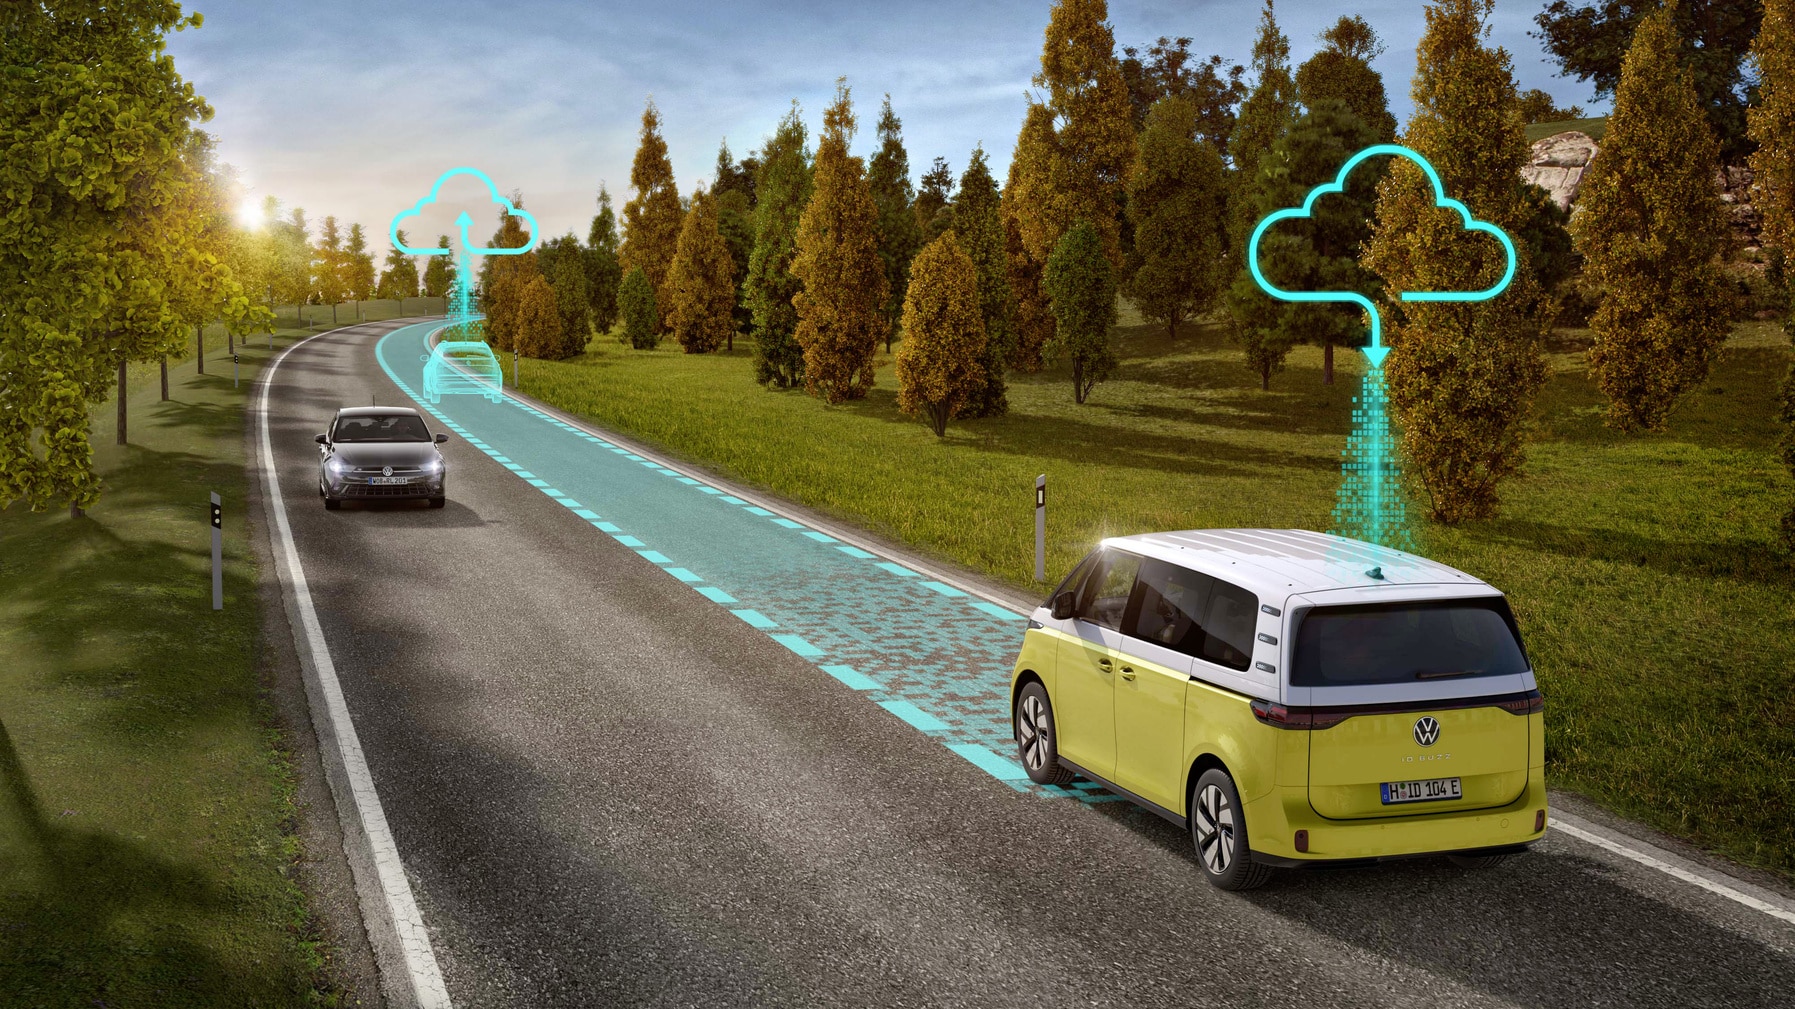 the new ID. Buzz impresses with innovative driver assistance systems